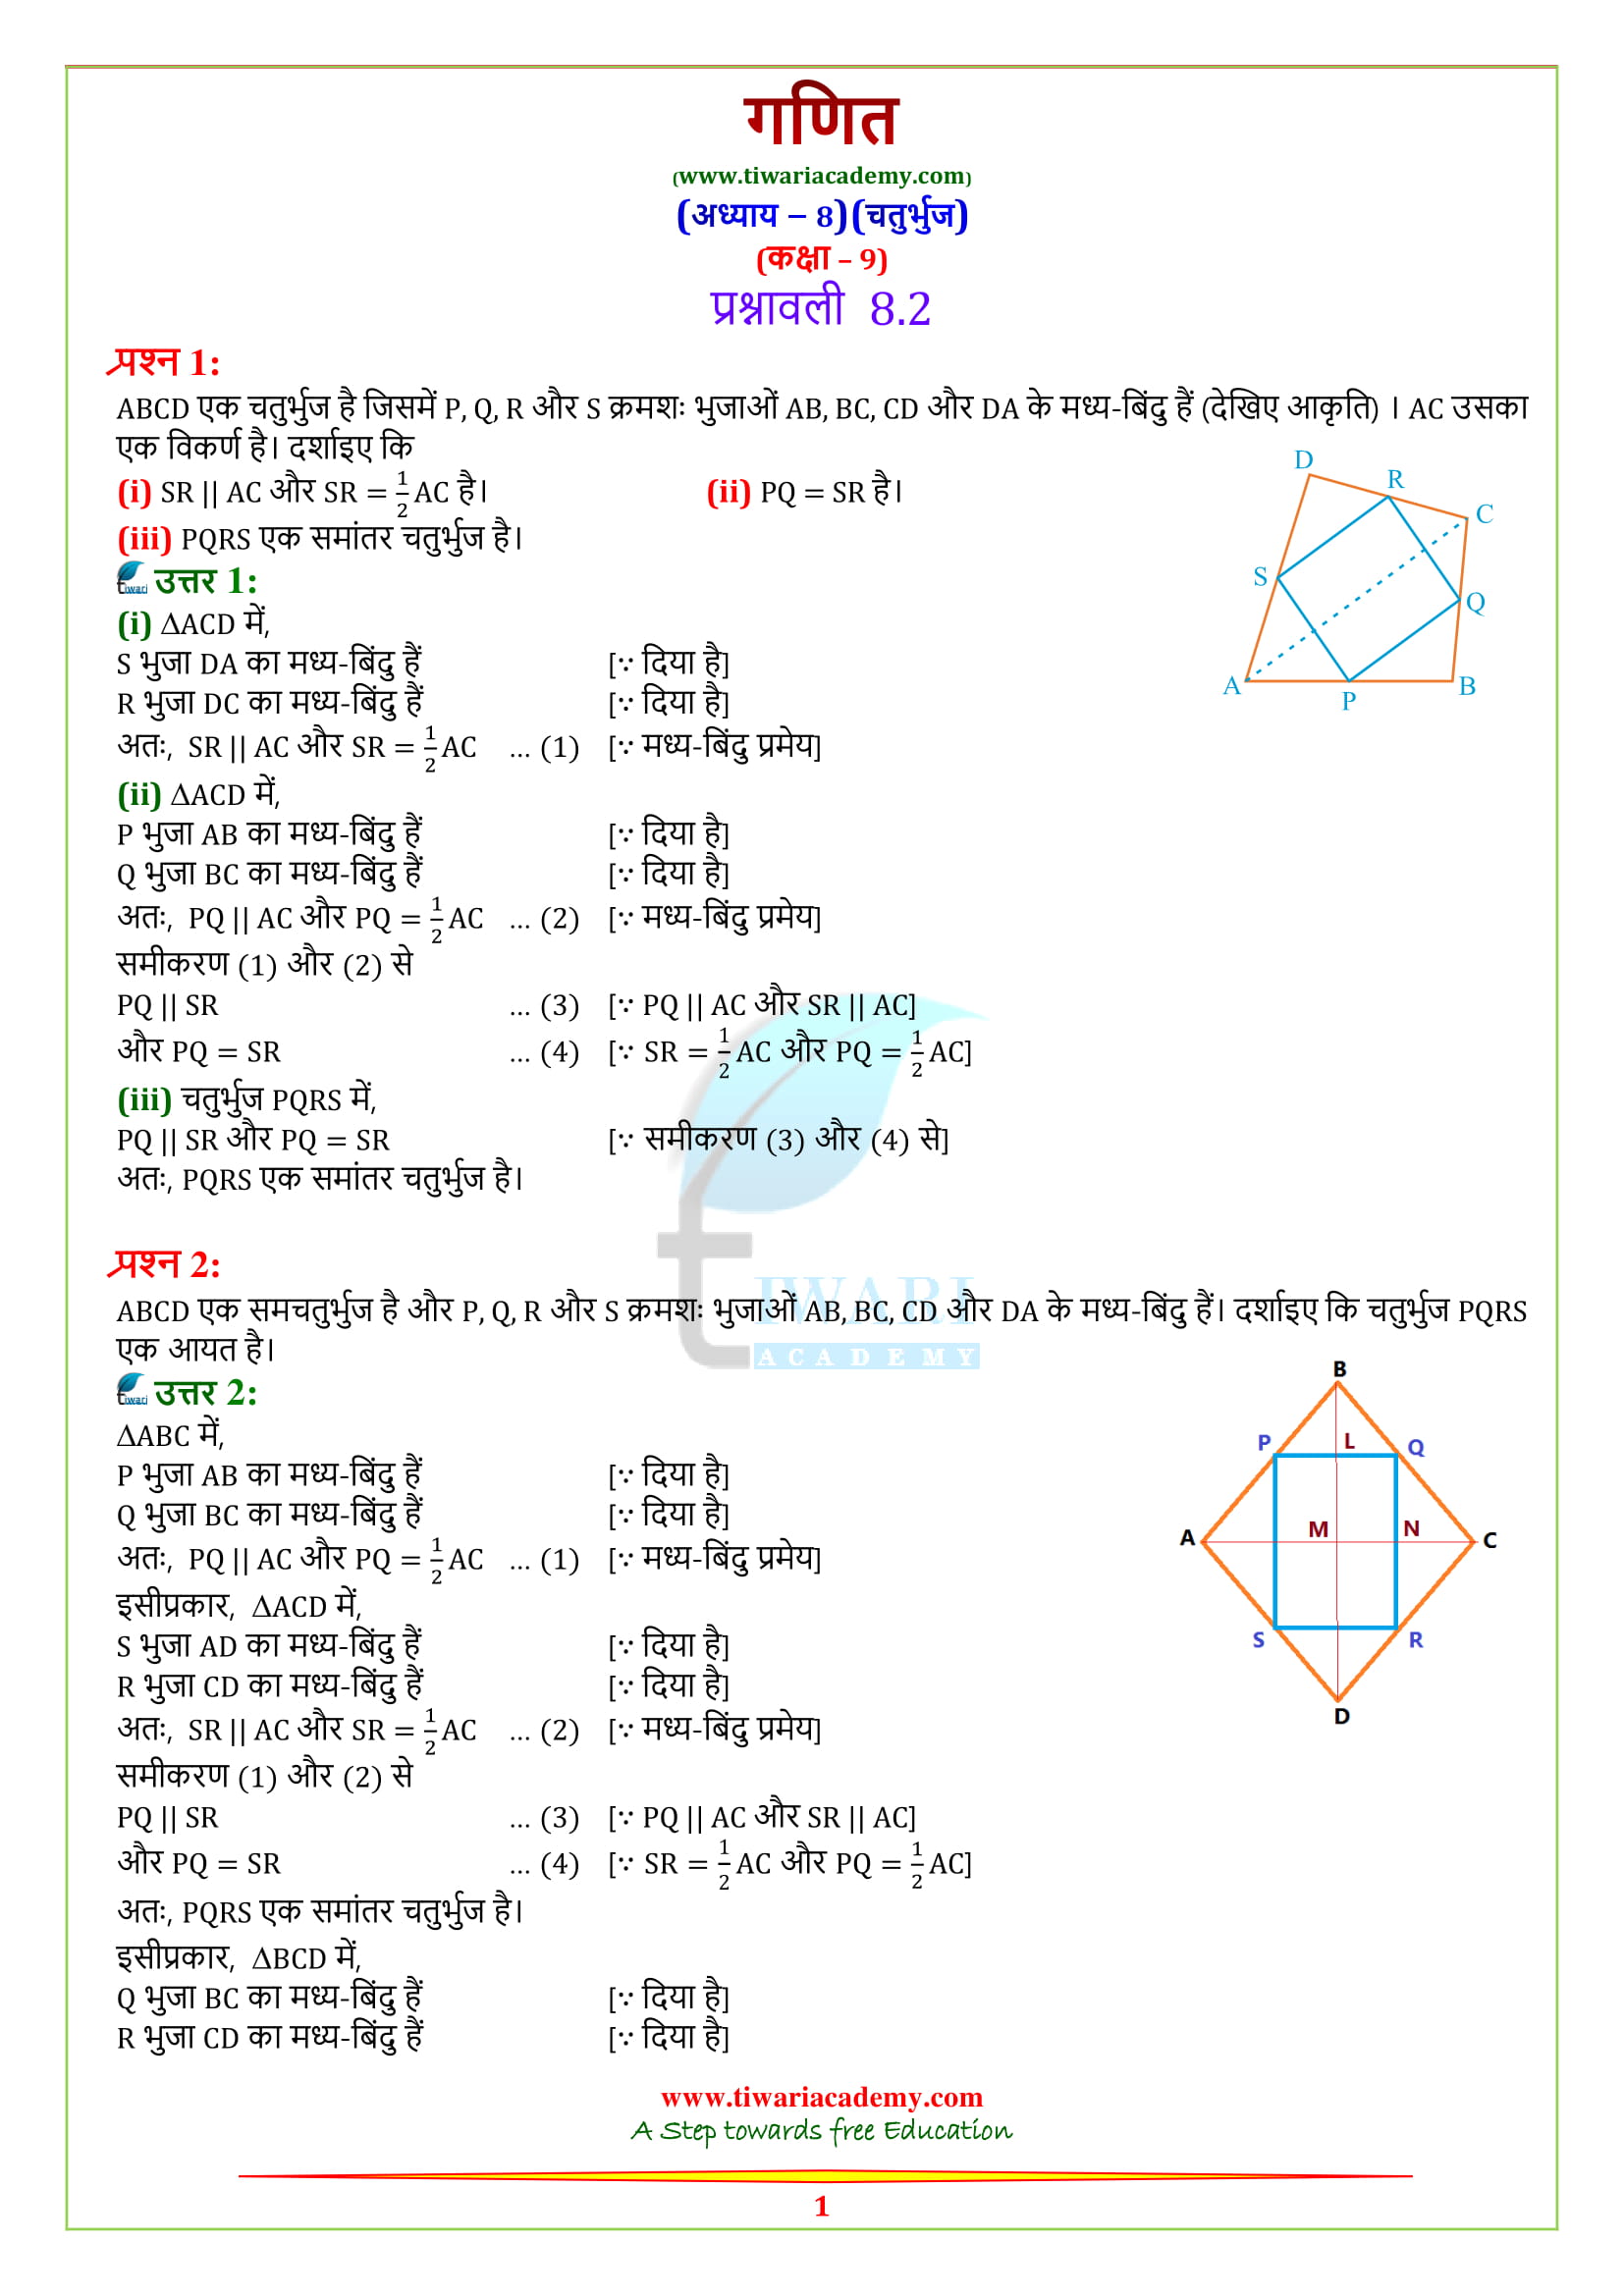 9 Maths Exercise 8.2 solutions for CBSE and UP Board students 2018-2019.